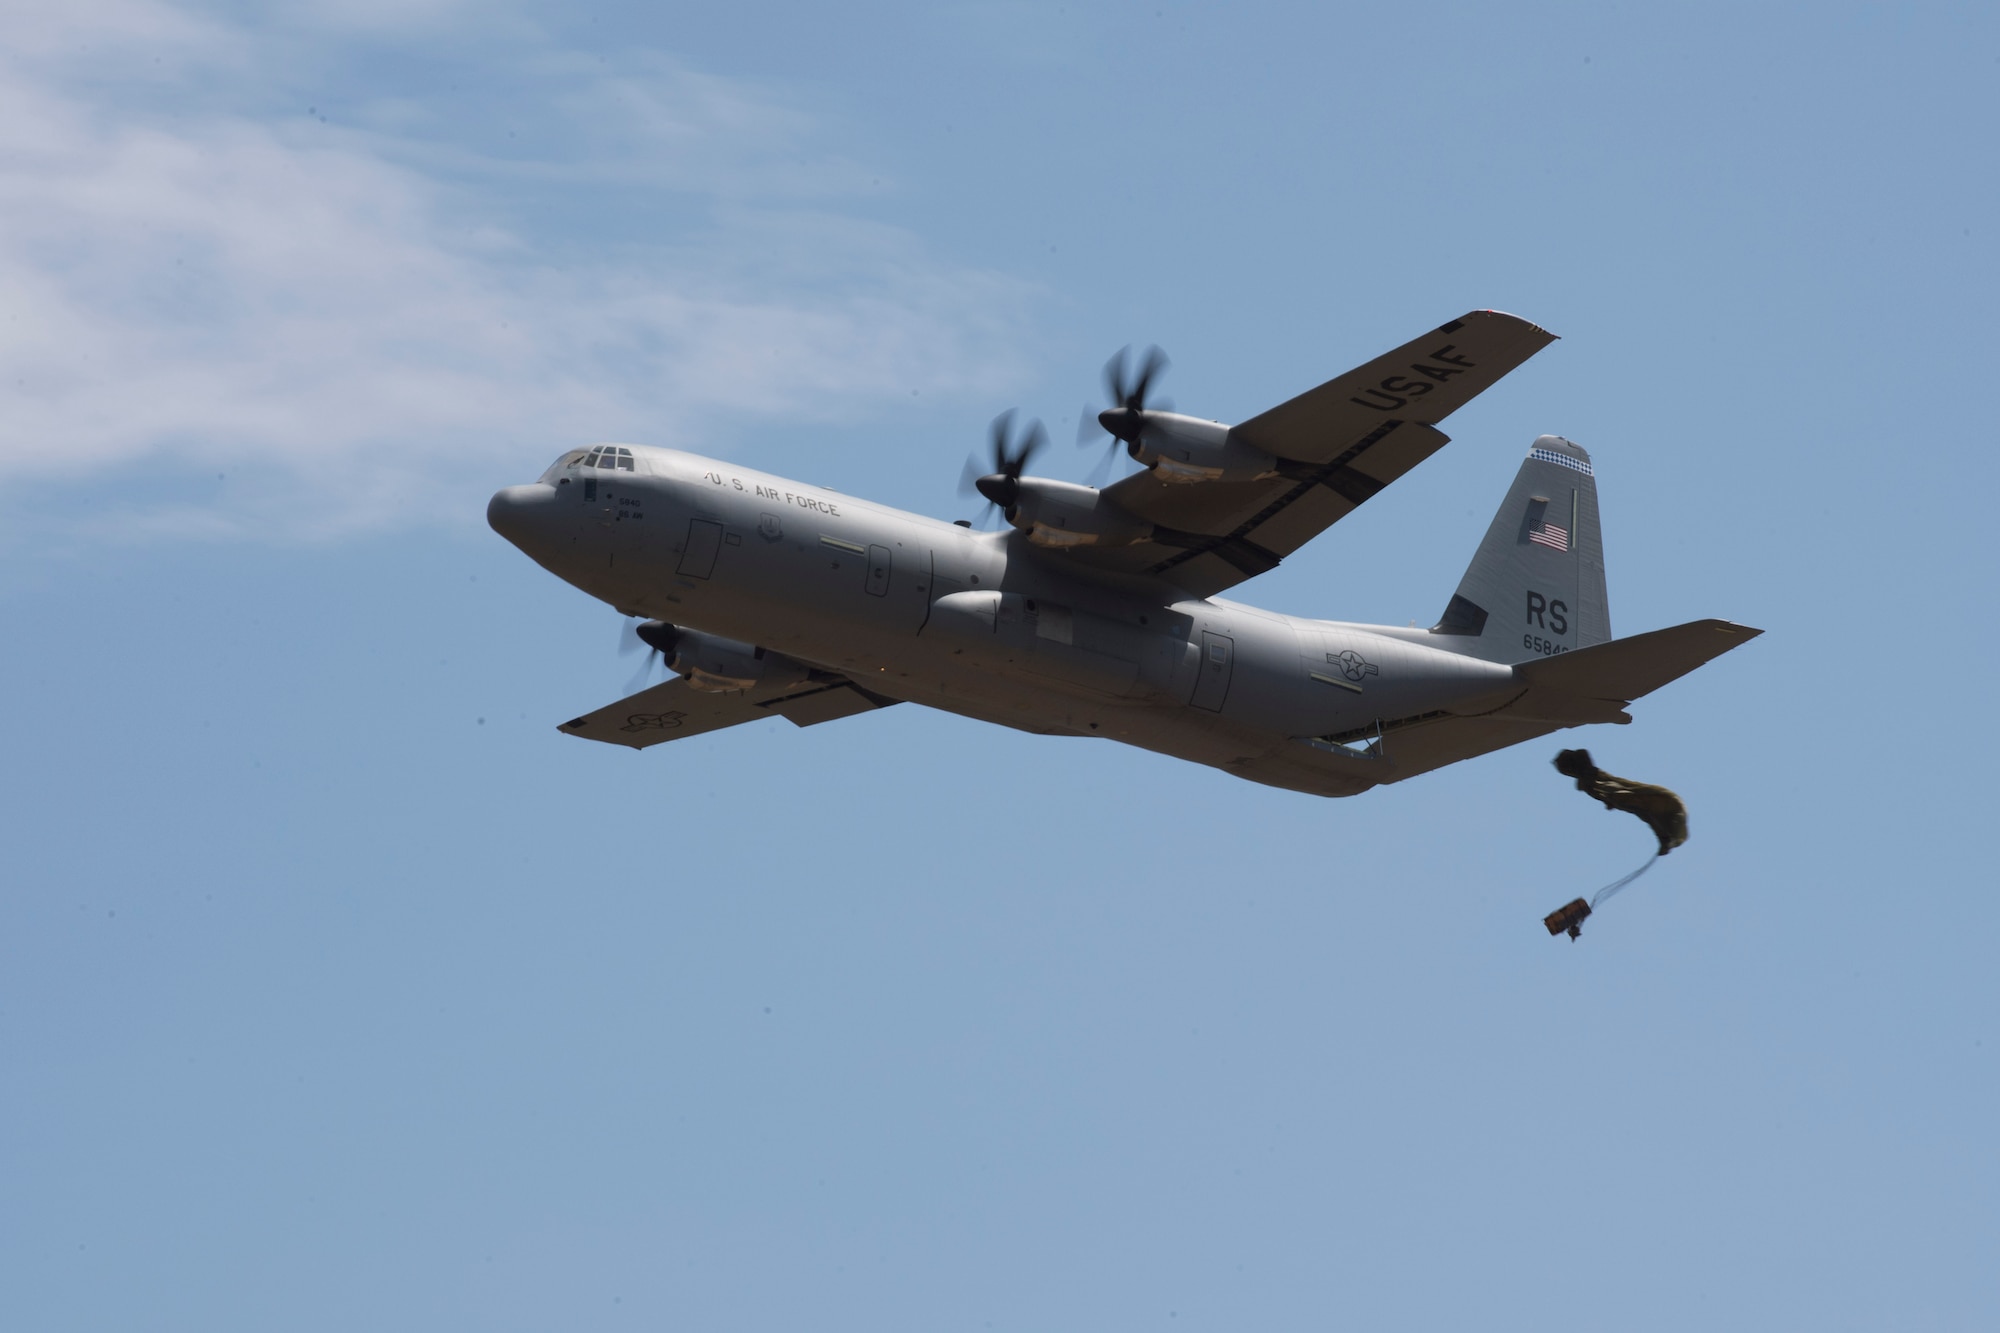 A U.S. Air Force C-130J Super Hercules drops a low cost low altitude bundle during exercise Stolen Cerberus V, over Megara Drop Zone, Greece, May 15, 2018. Hellenic riggers worked with U.S. Air Force Joint Airdrop Inspectors to ensure the LCLA bundle were rigged properly. (U.S. Air Force photo by Senior Airman Devin M. Rumbaugh)